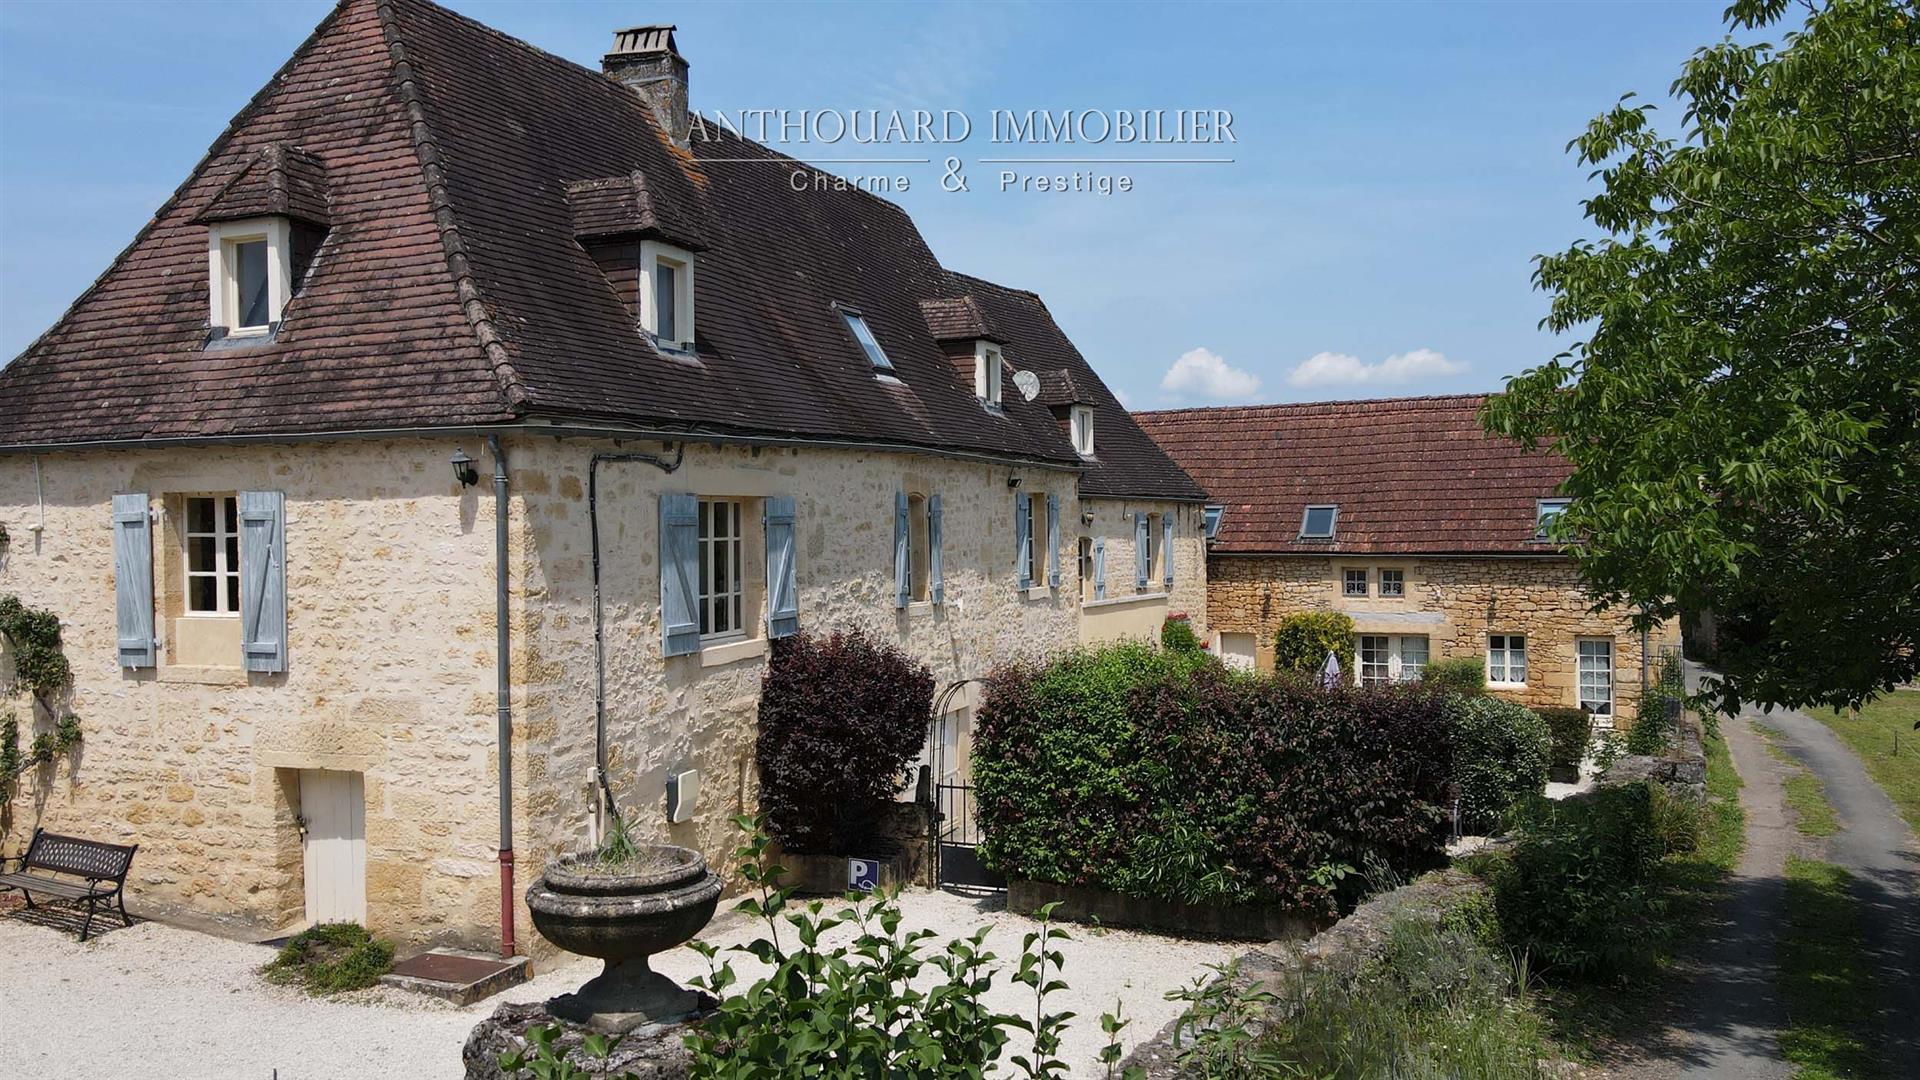 Cottages in the heart of the Périgord Noir